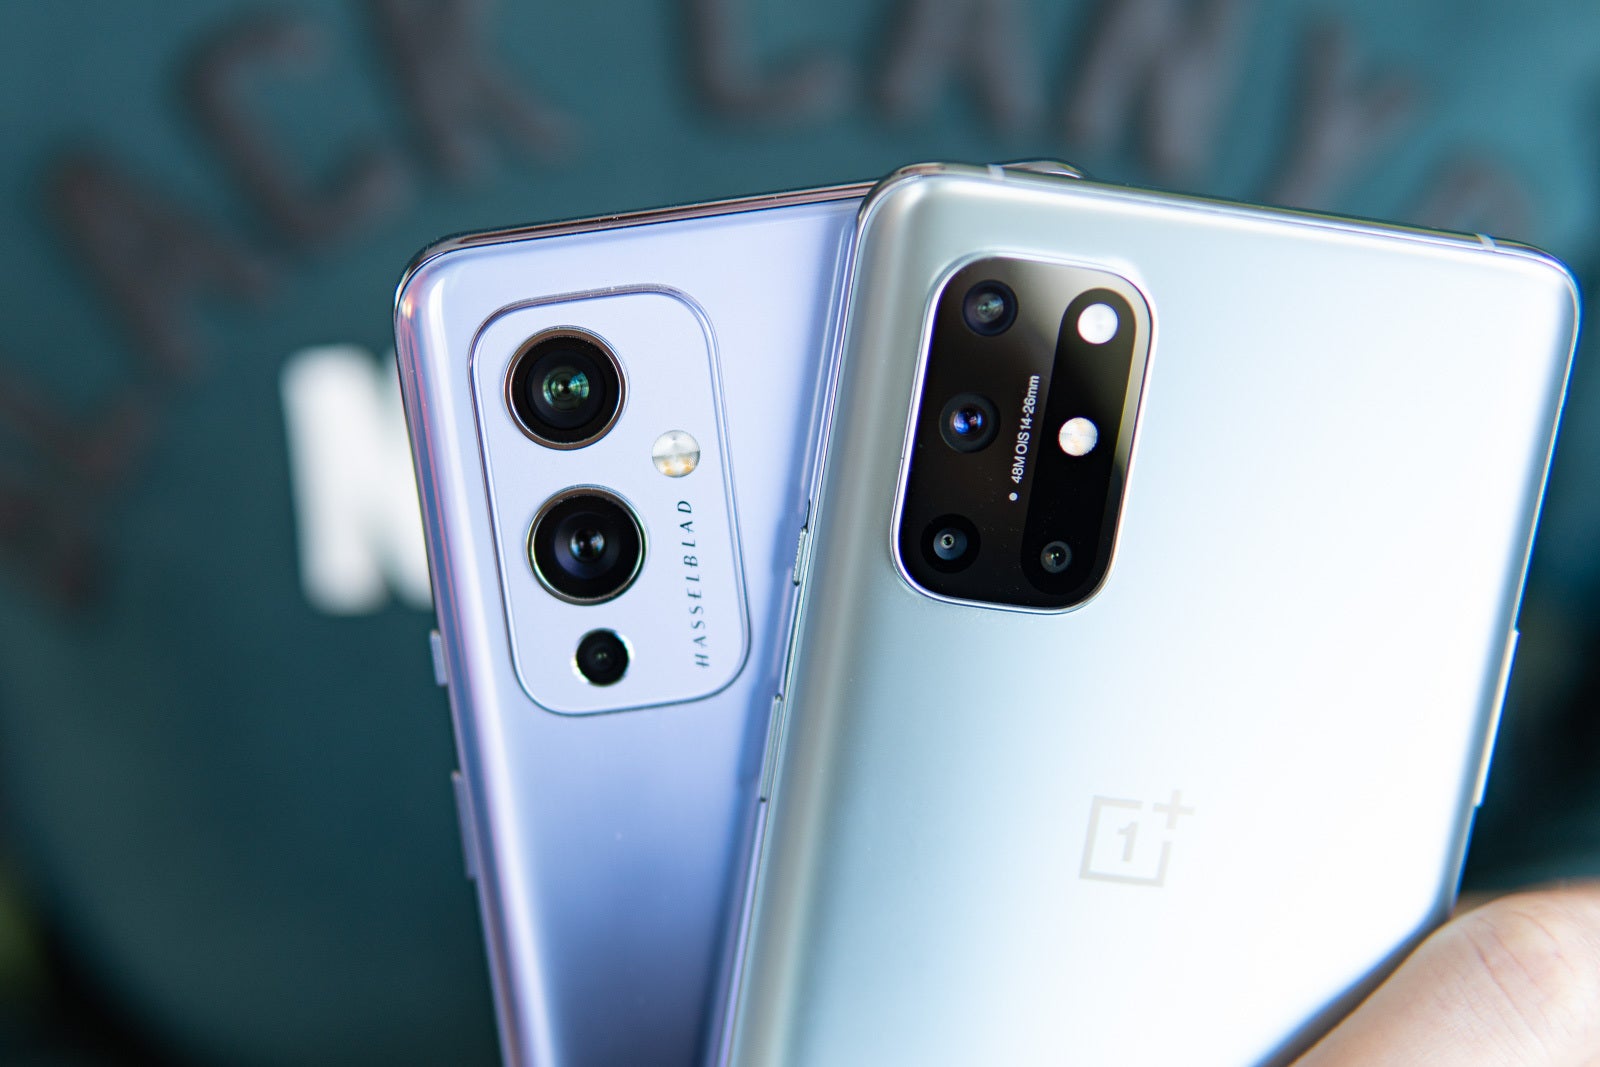 The OnePlus 9 camera module with Hasselblad branding (left) and the OnePlus 8T camera module - OnePlus 9 vs OnePlus 8T